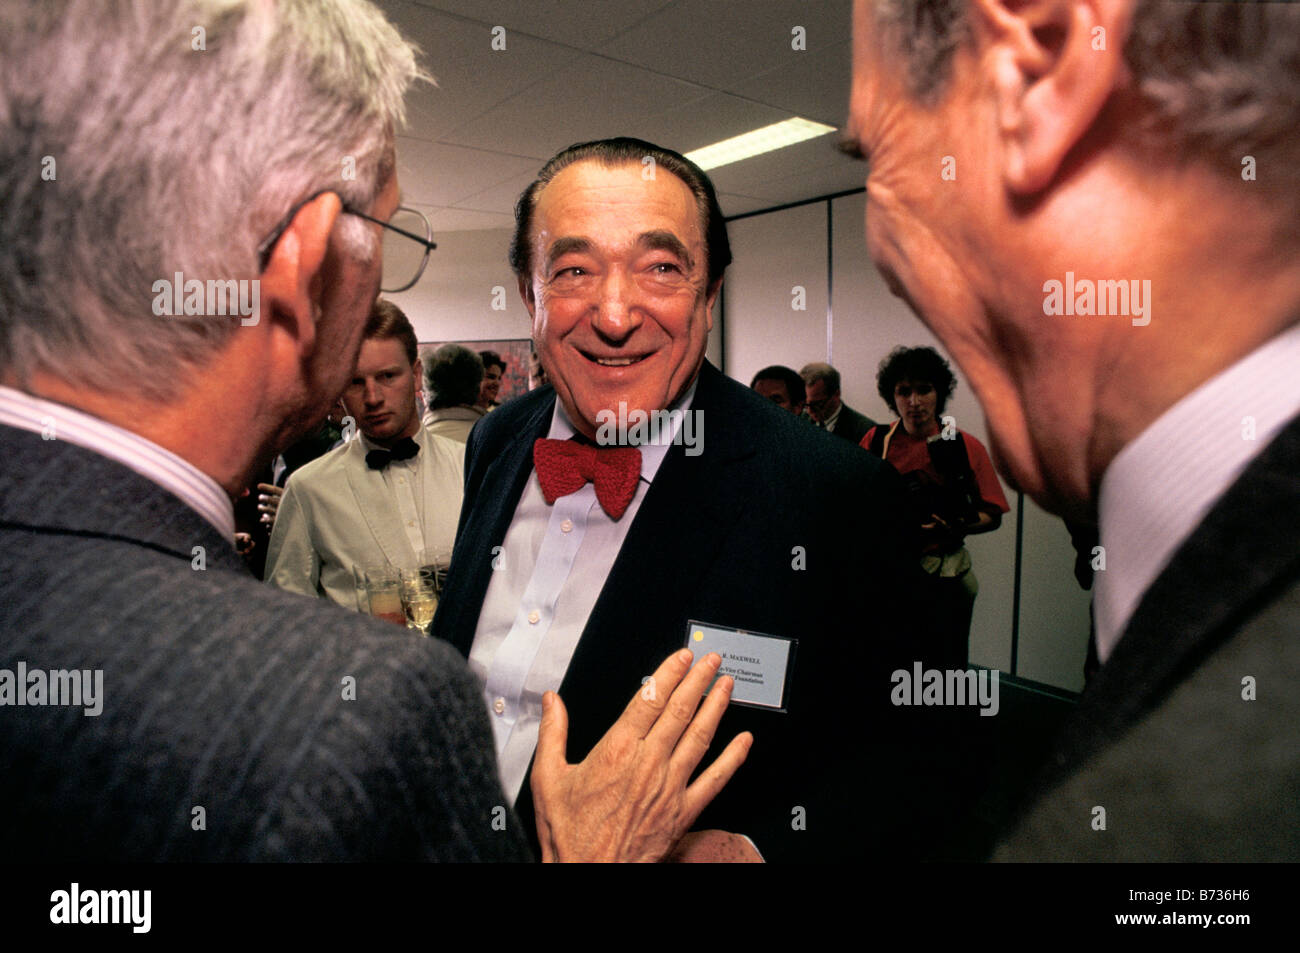 Robert Maxwell (right),  media mogul and owner of Mirror Group Newspapers,  arrives at a cancer charity event in Bruxelles. Stock Photo